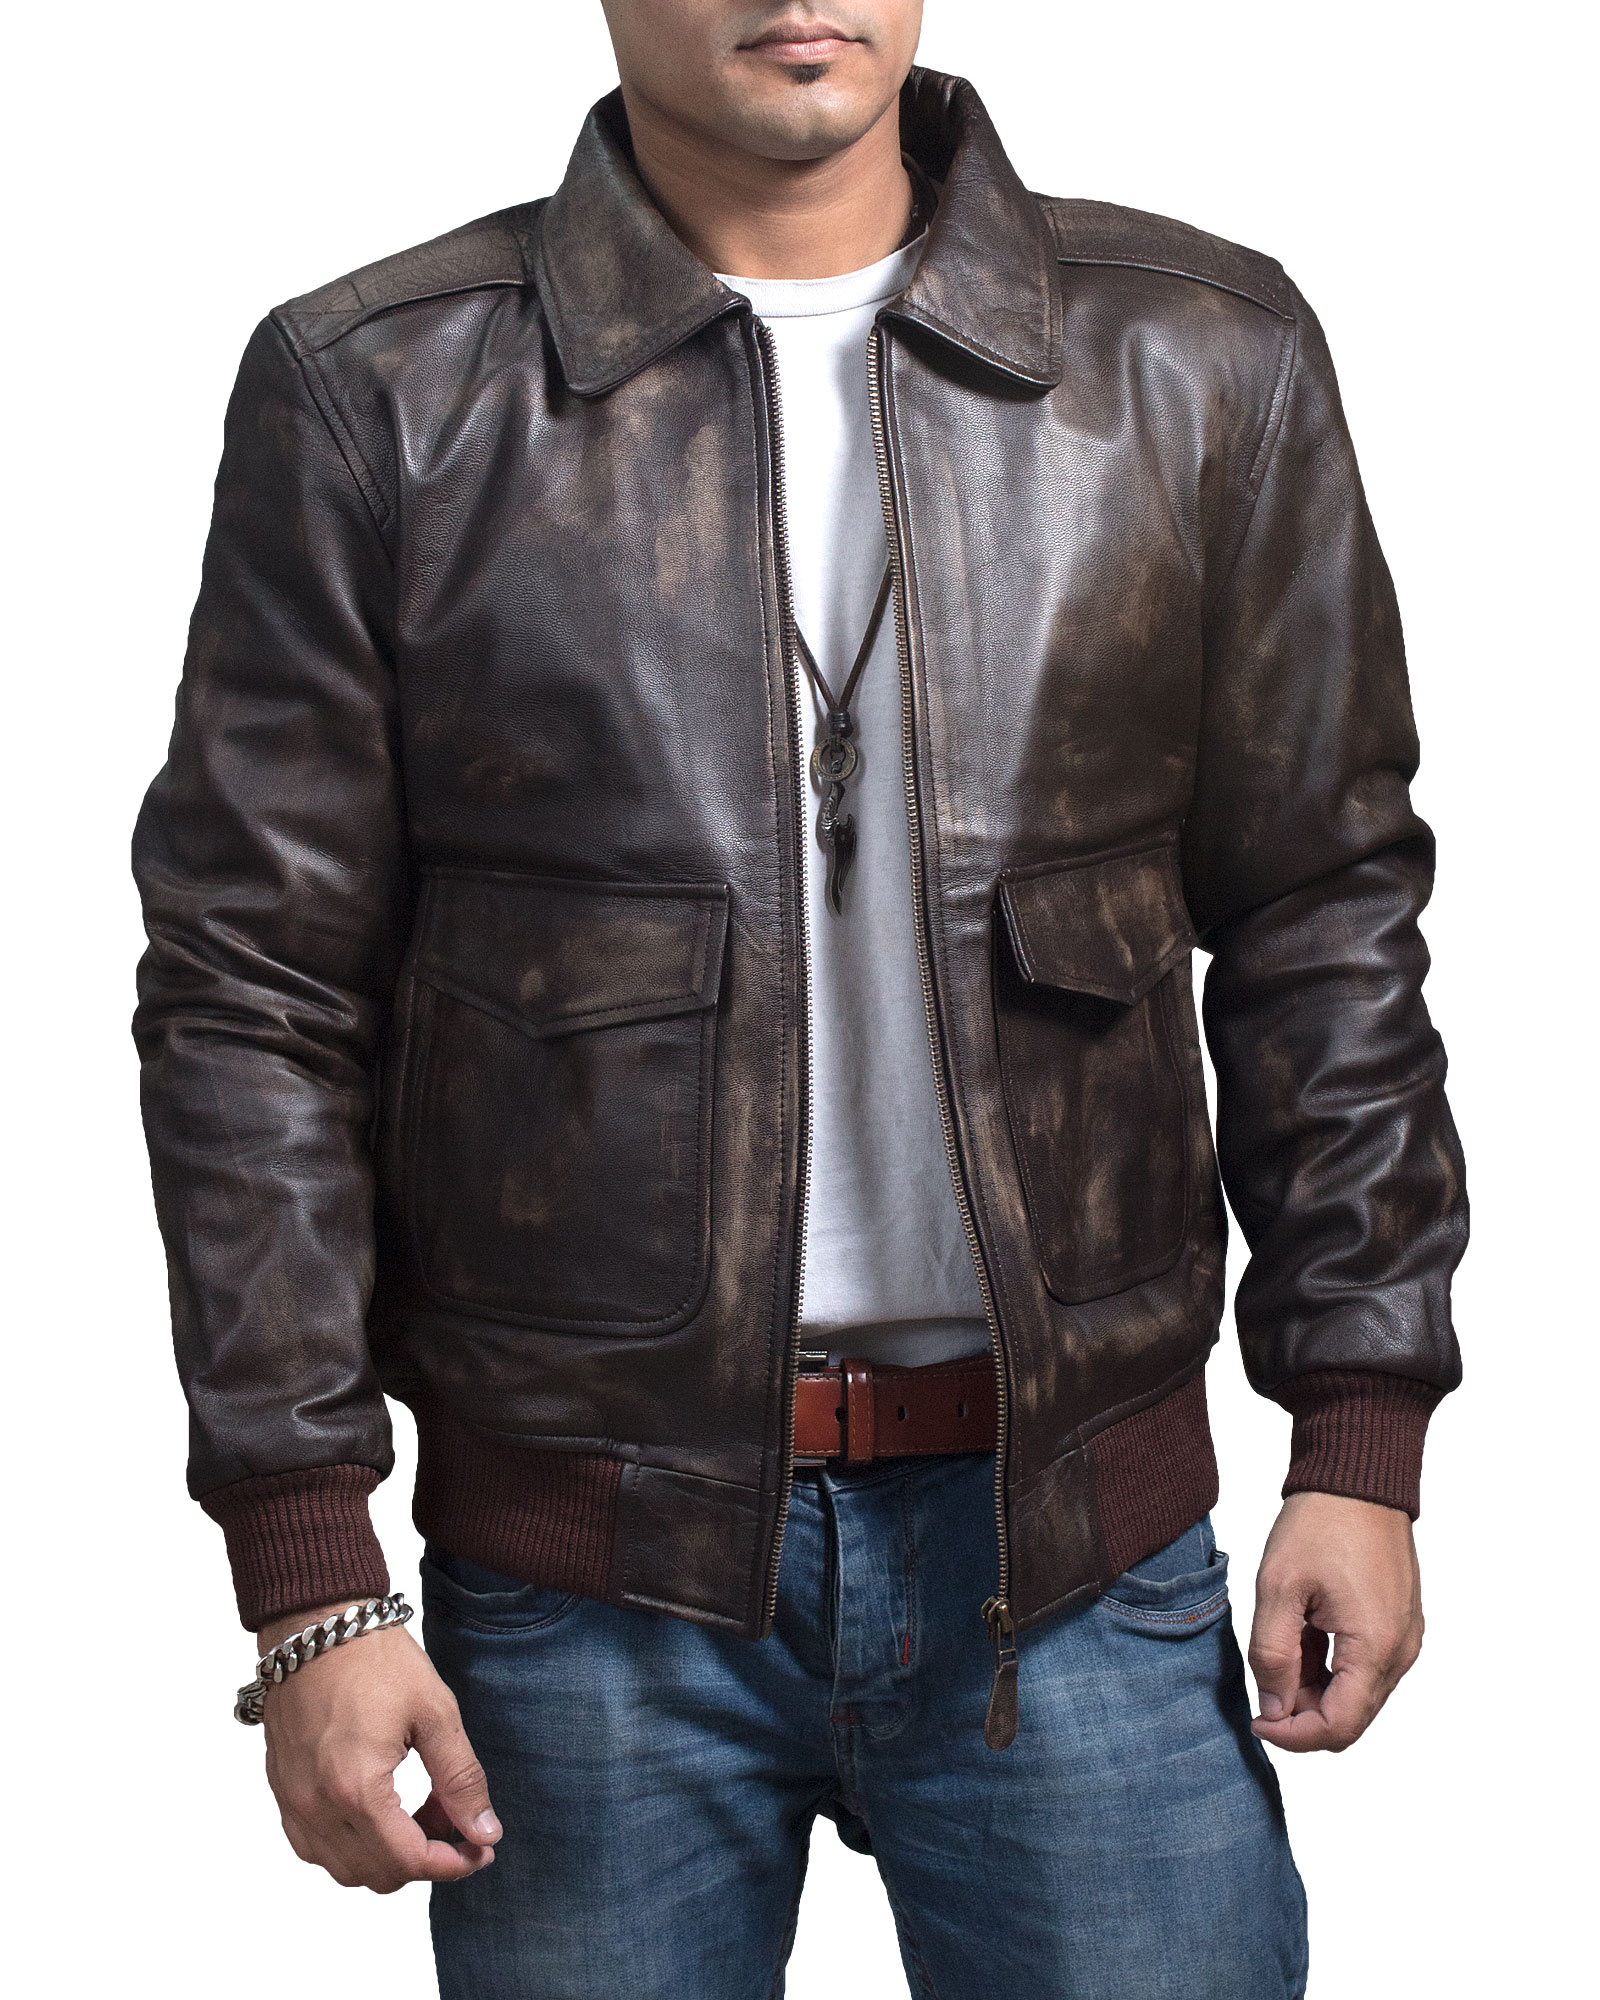 Mens A2 Flight Distressed Brown Leather Bomber Jacket | XtremeJackets